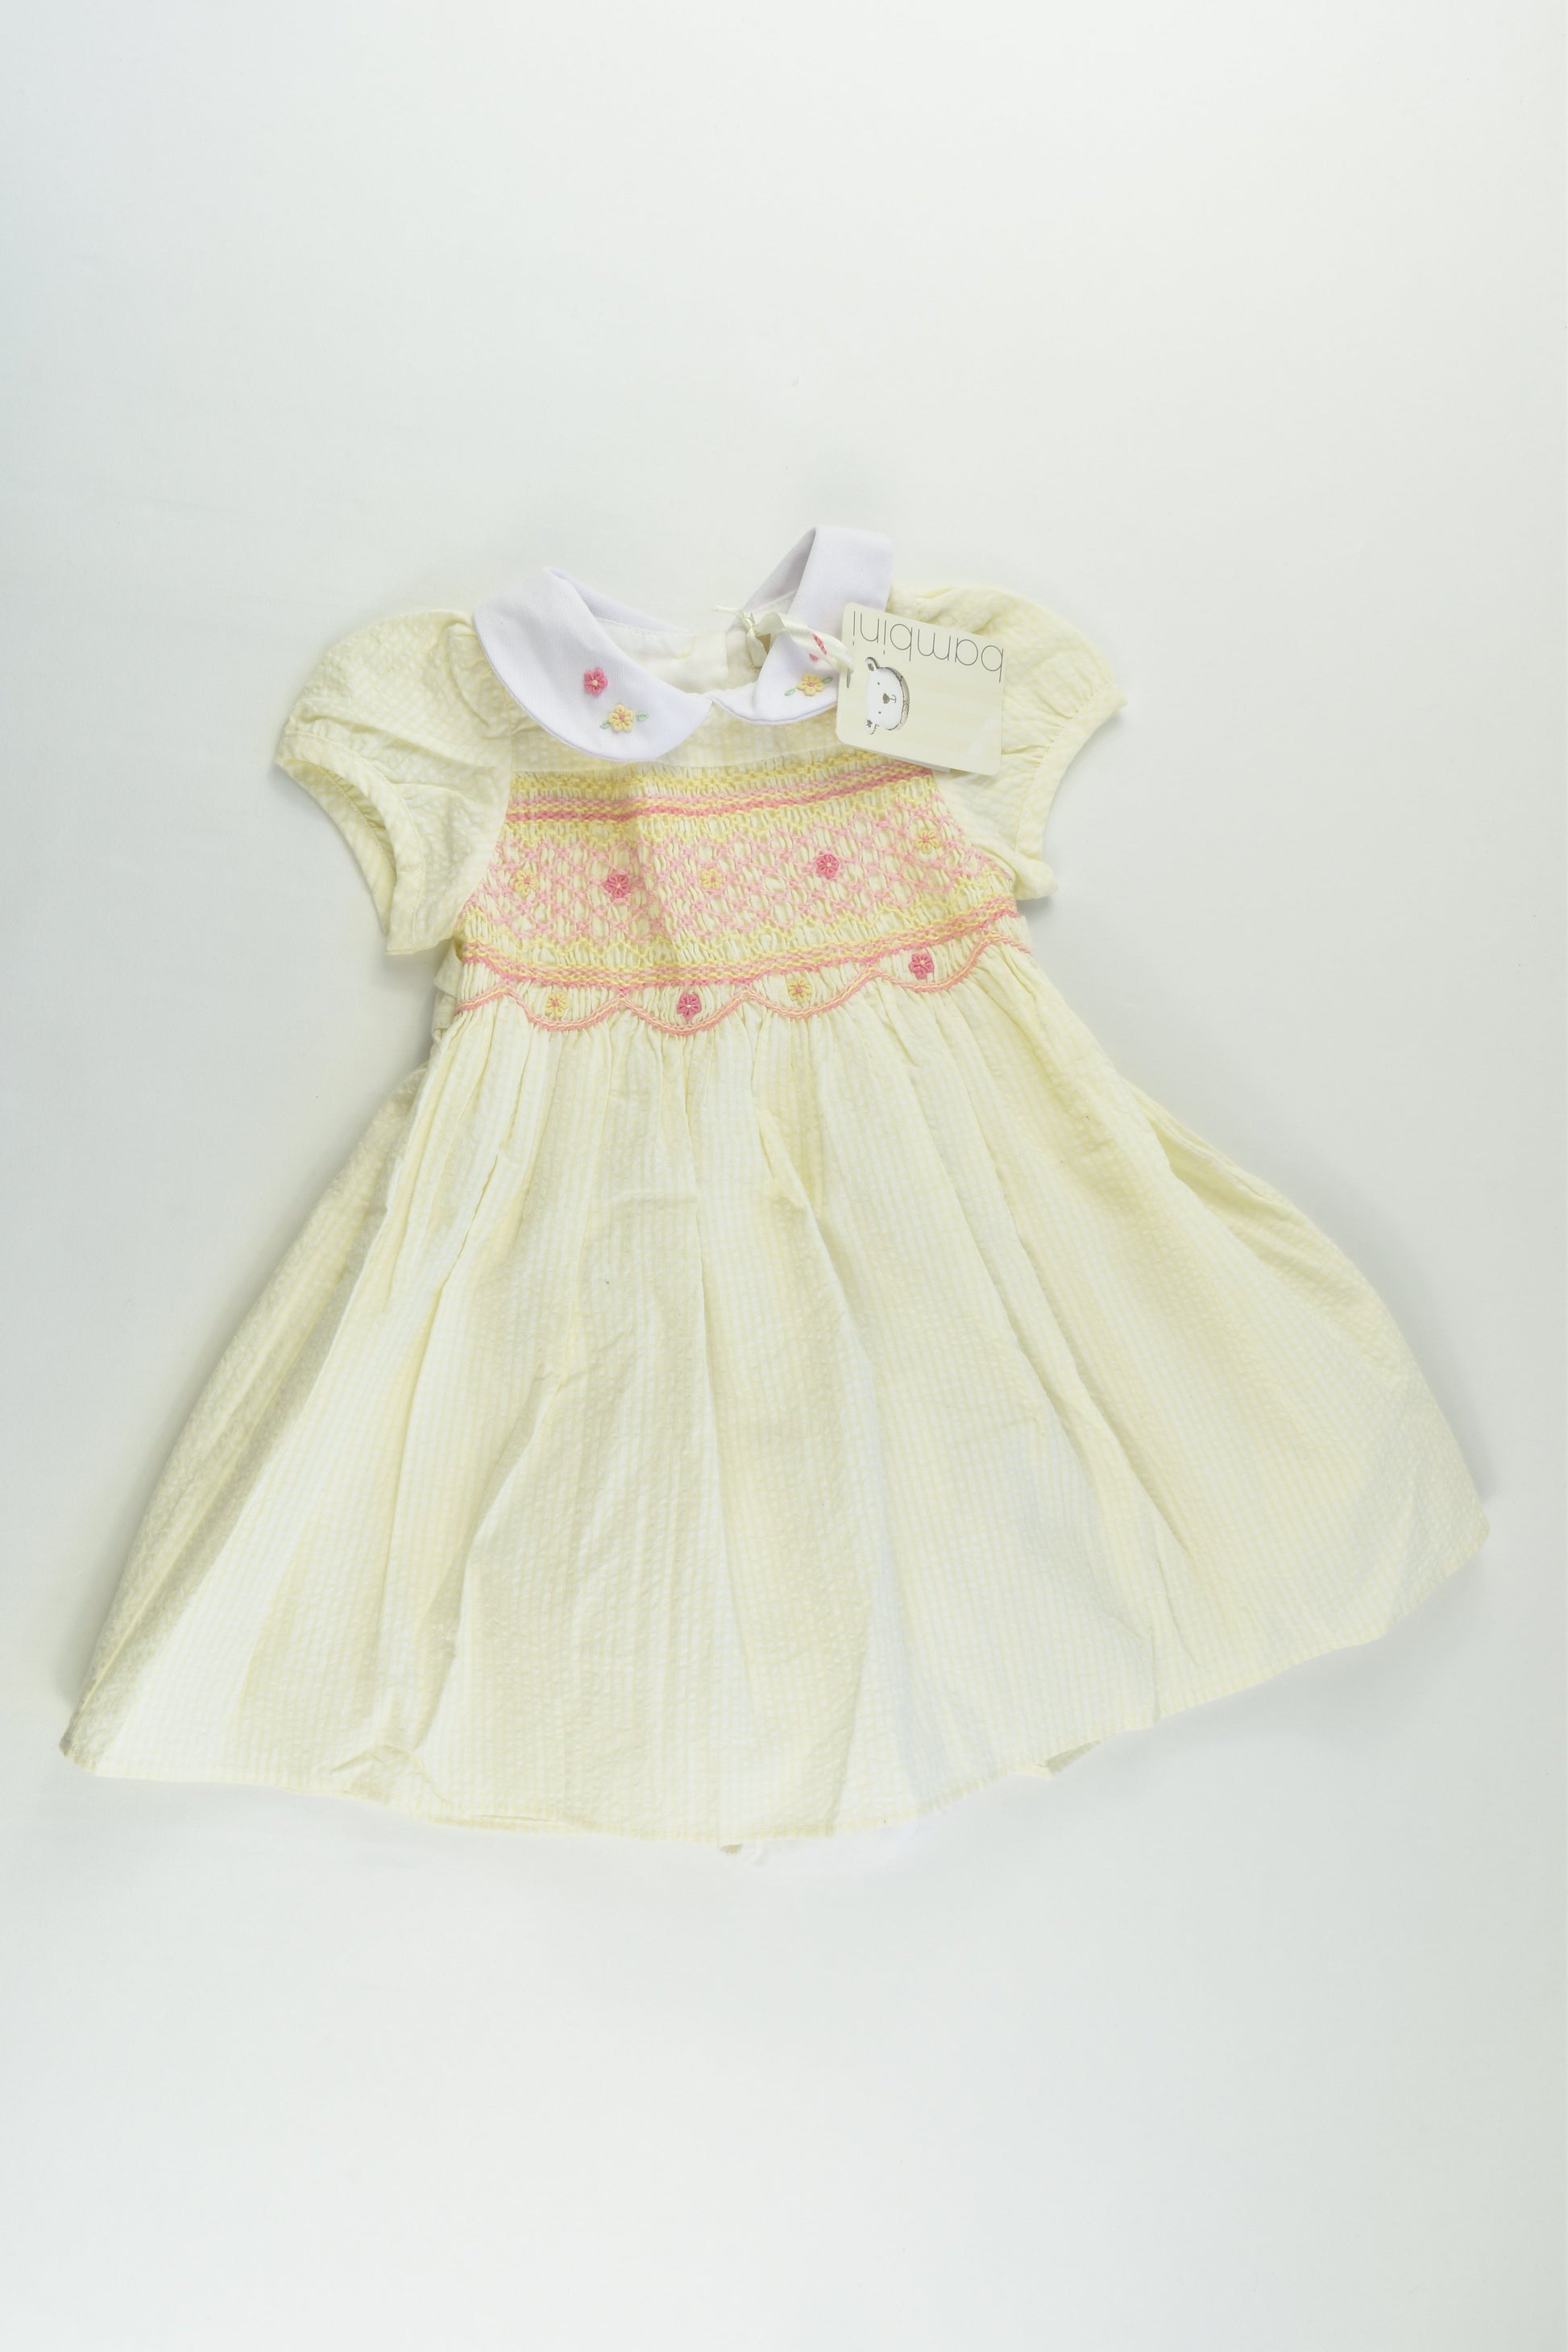 NEW Bambini by BHS Size 00 (3-6 months, 68 cm) Lined Smocked Dress with Matching Bloomers